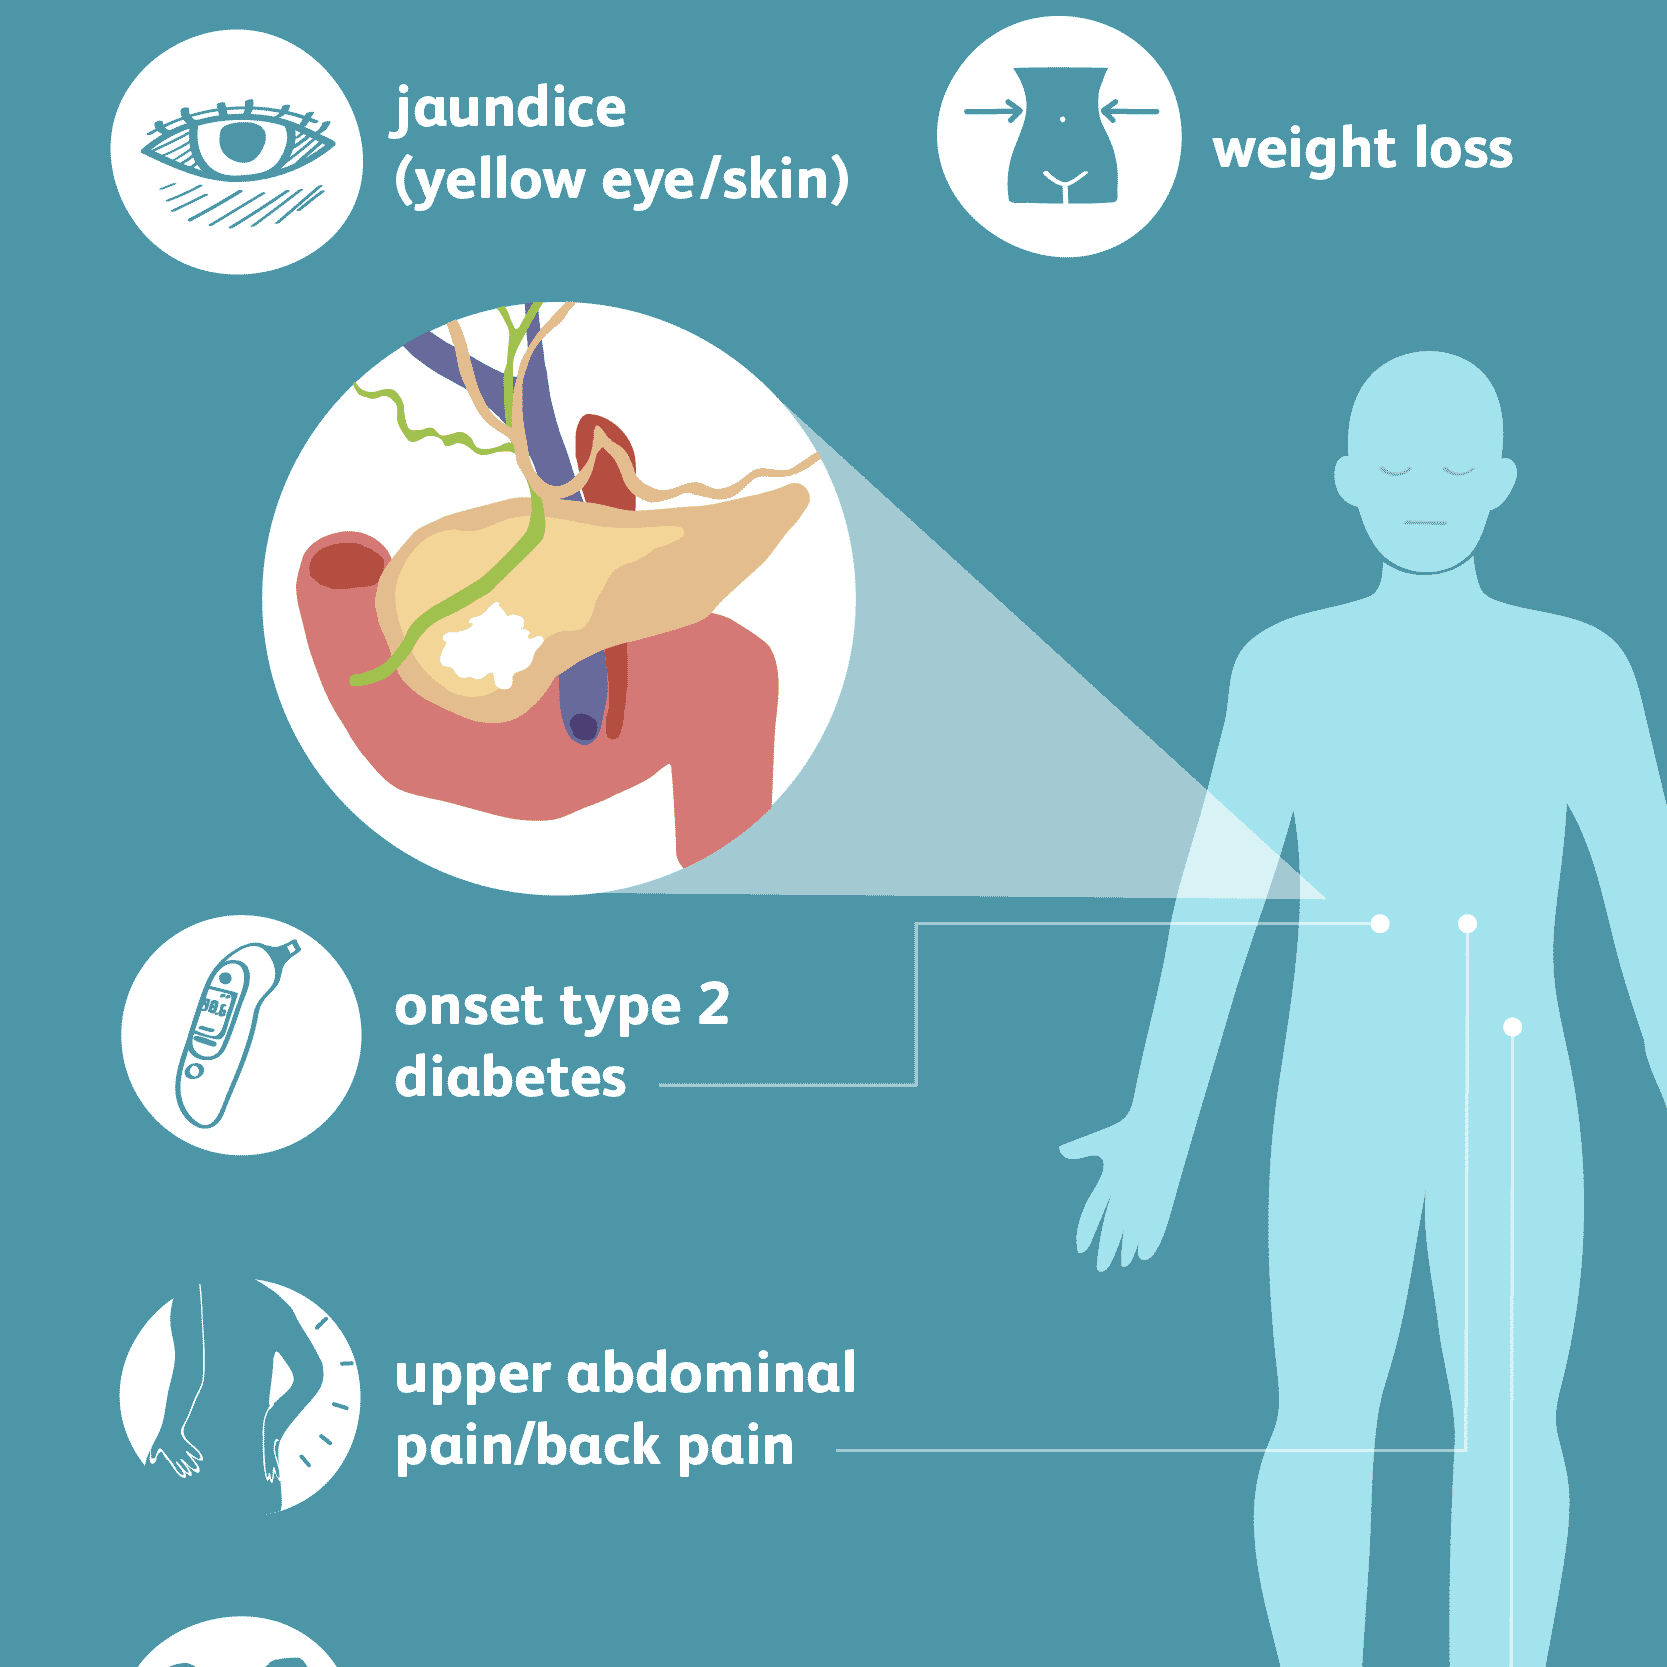 Pancreatic Cancer: Signs, Symptoms, and Complications